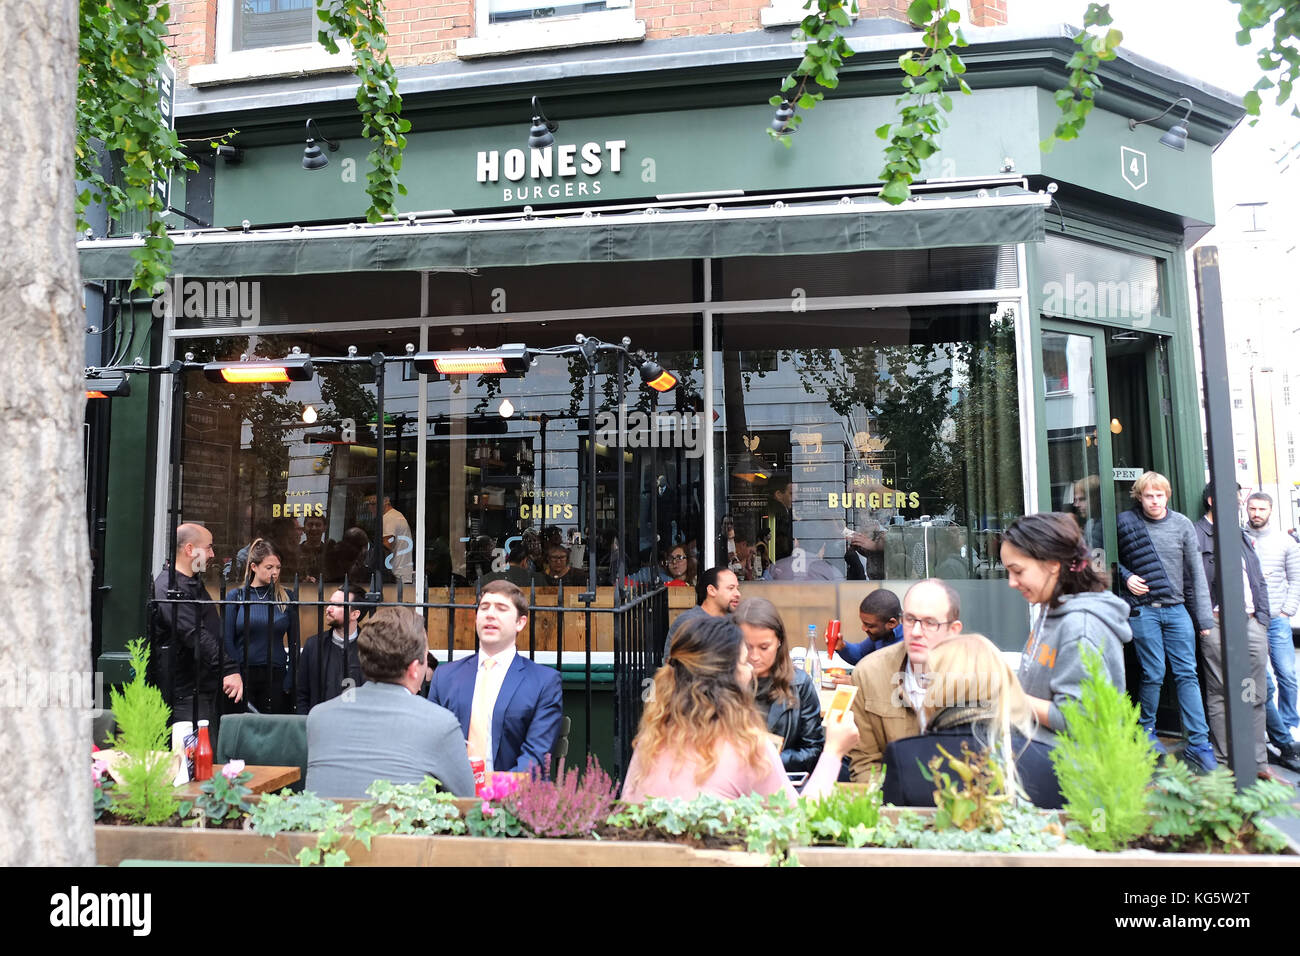 Honest Burgers 4 Market Place London W1W 8AD the latest dirty burger chain to grow and expand in London UK Stock Photo